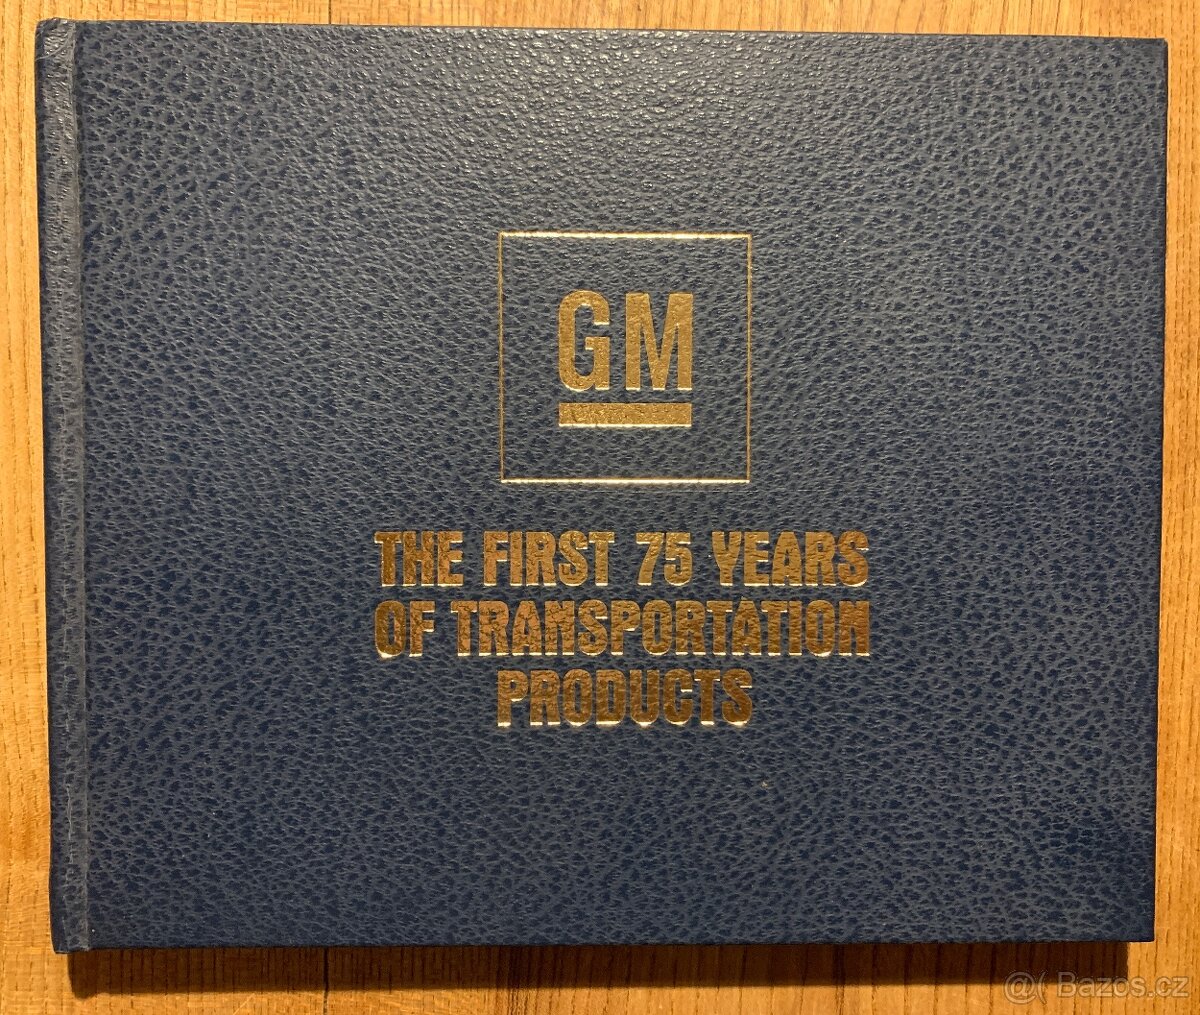 GM - The First 75 Years of Transportation Products